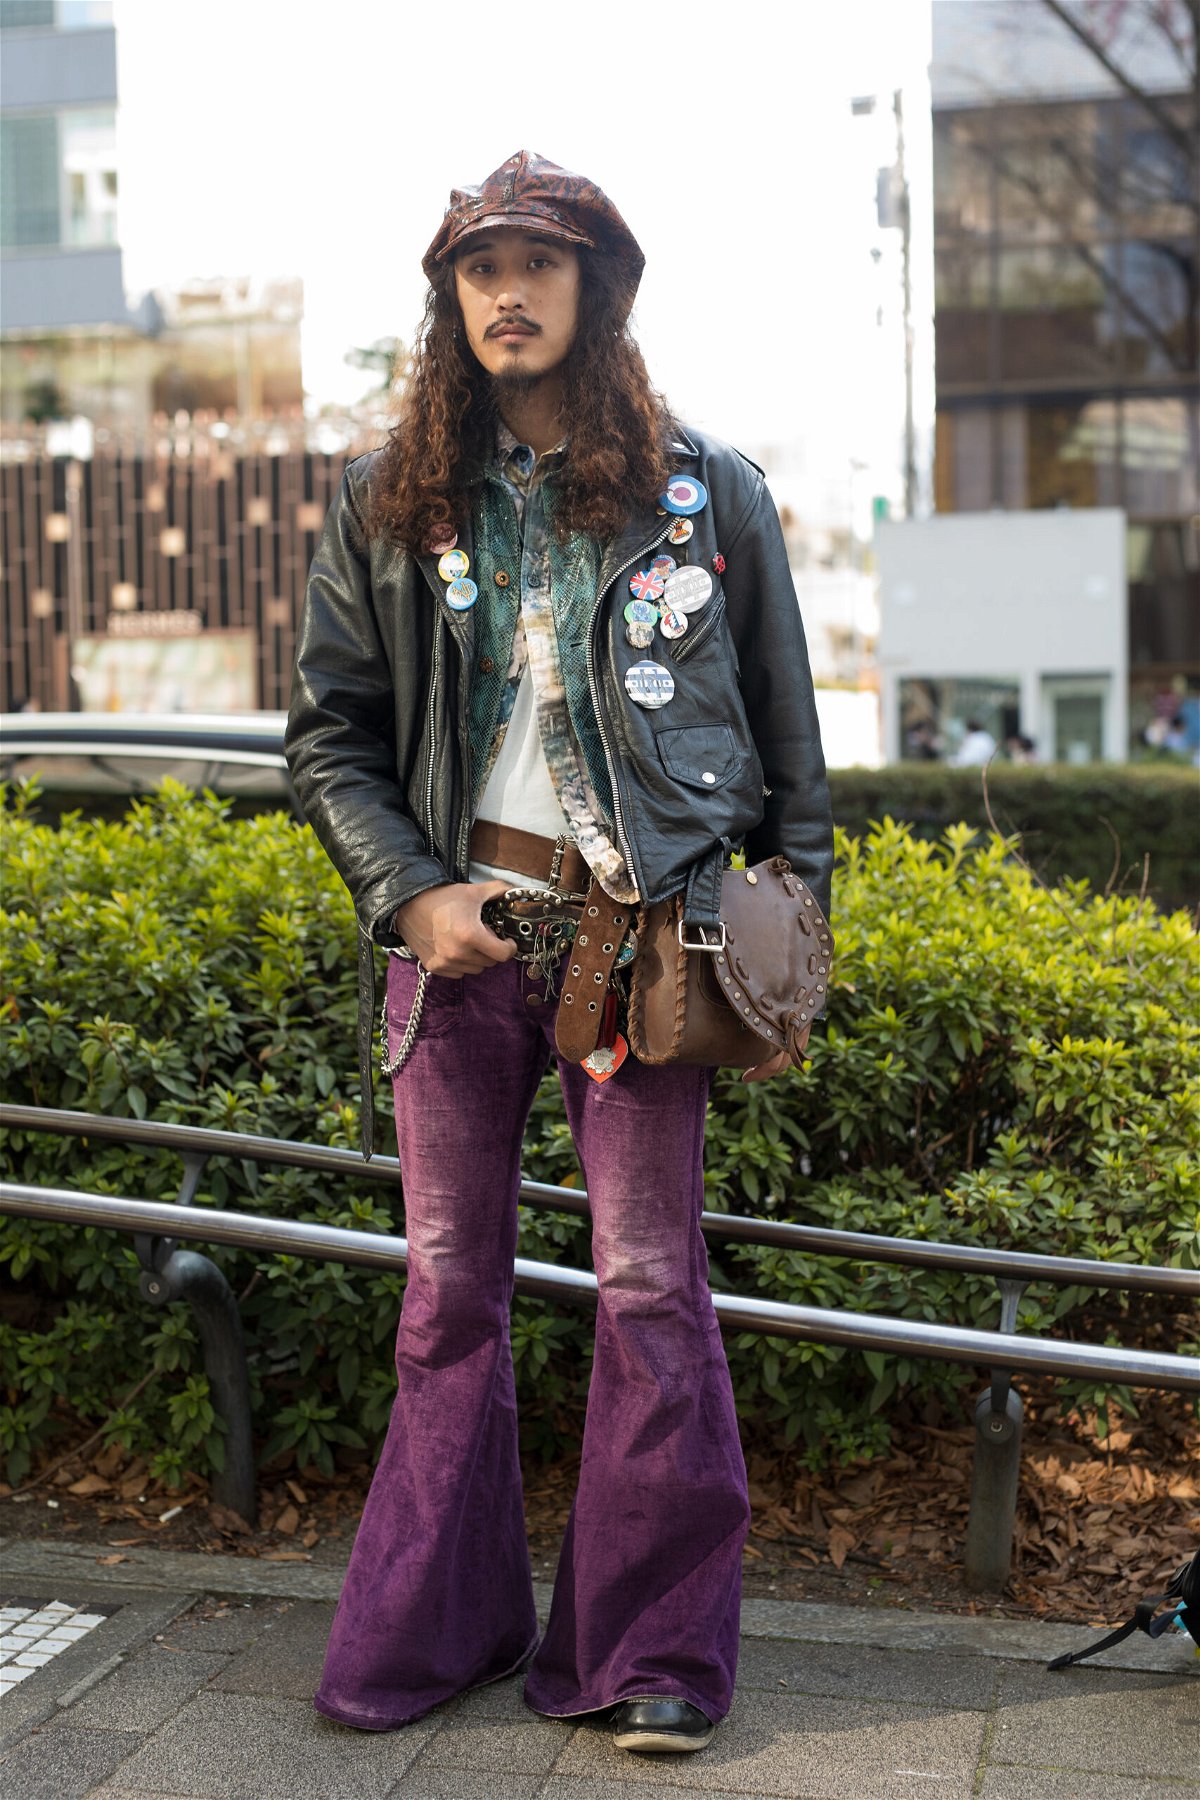 Japanese fashion is so free': The best street style at Tokyo